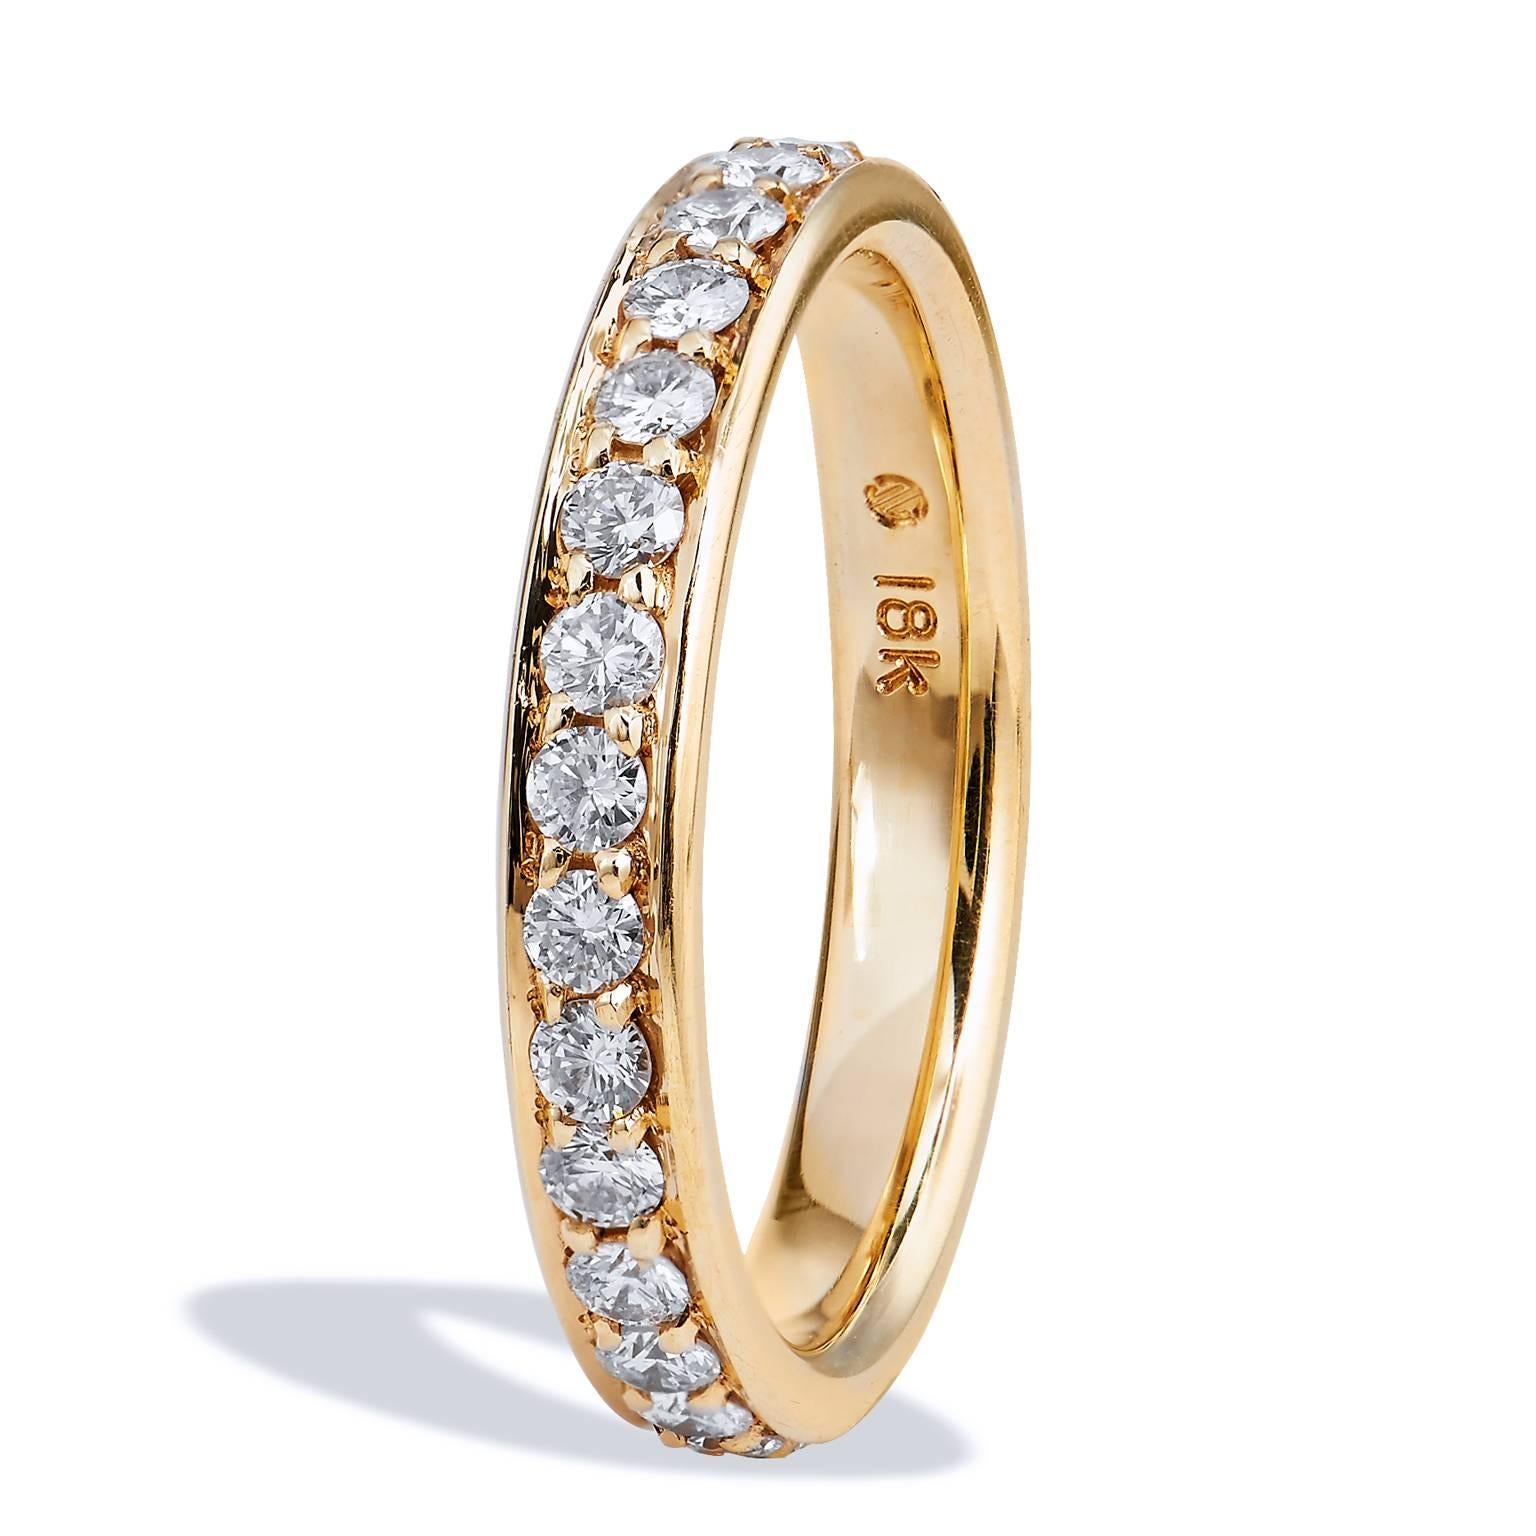 18 Karat Yellow Gold 0.67 Carat Diamond Eternity Wedding Band Ring

This is a one of a kind, handmade ring by H&H Jewels.  This band ring features 0.67 carat of round diamonds (F/G/VS) pave set. Affixed to an 18 karat yellow gold band, this ring